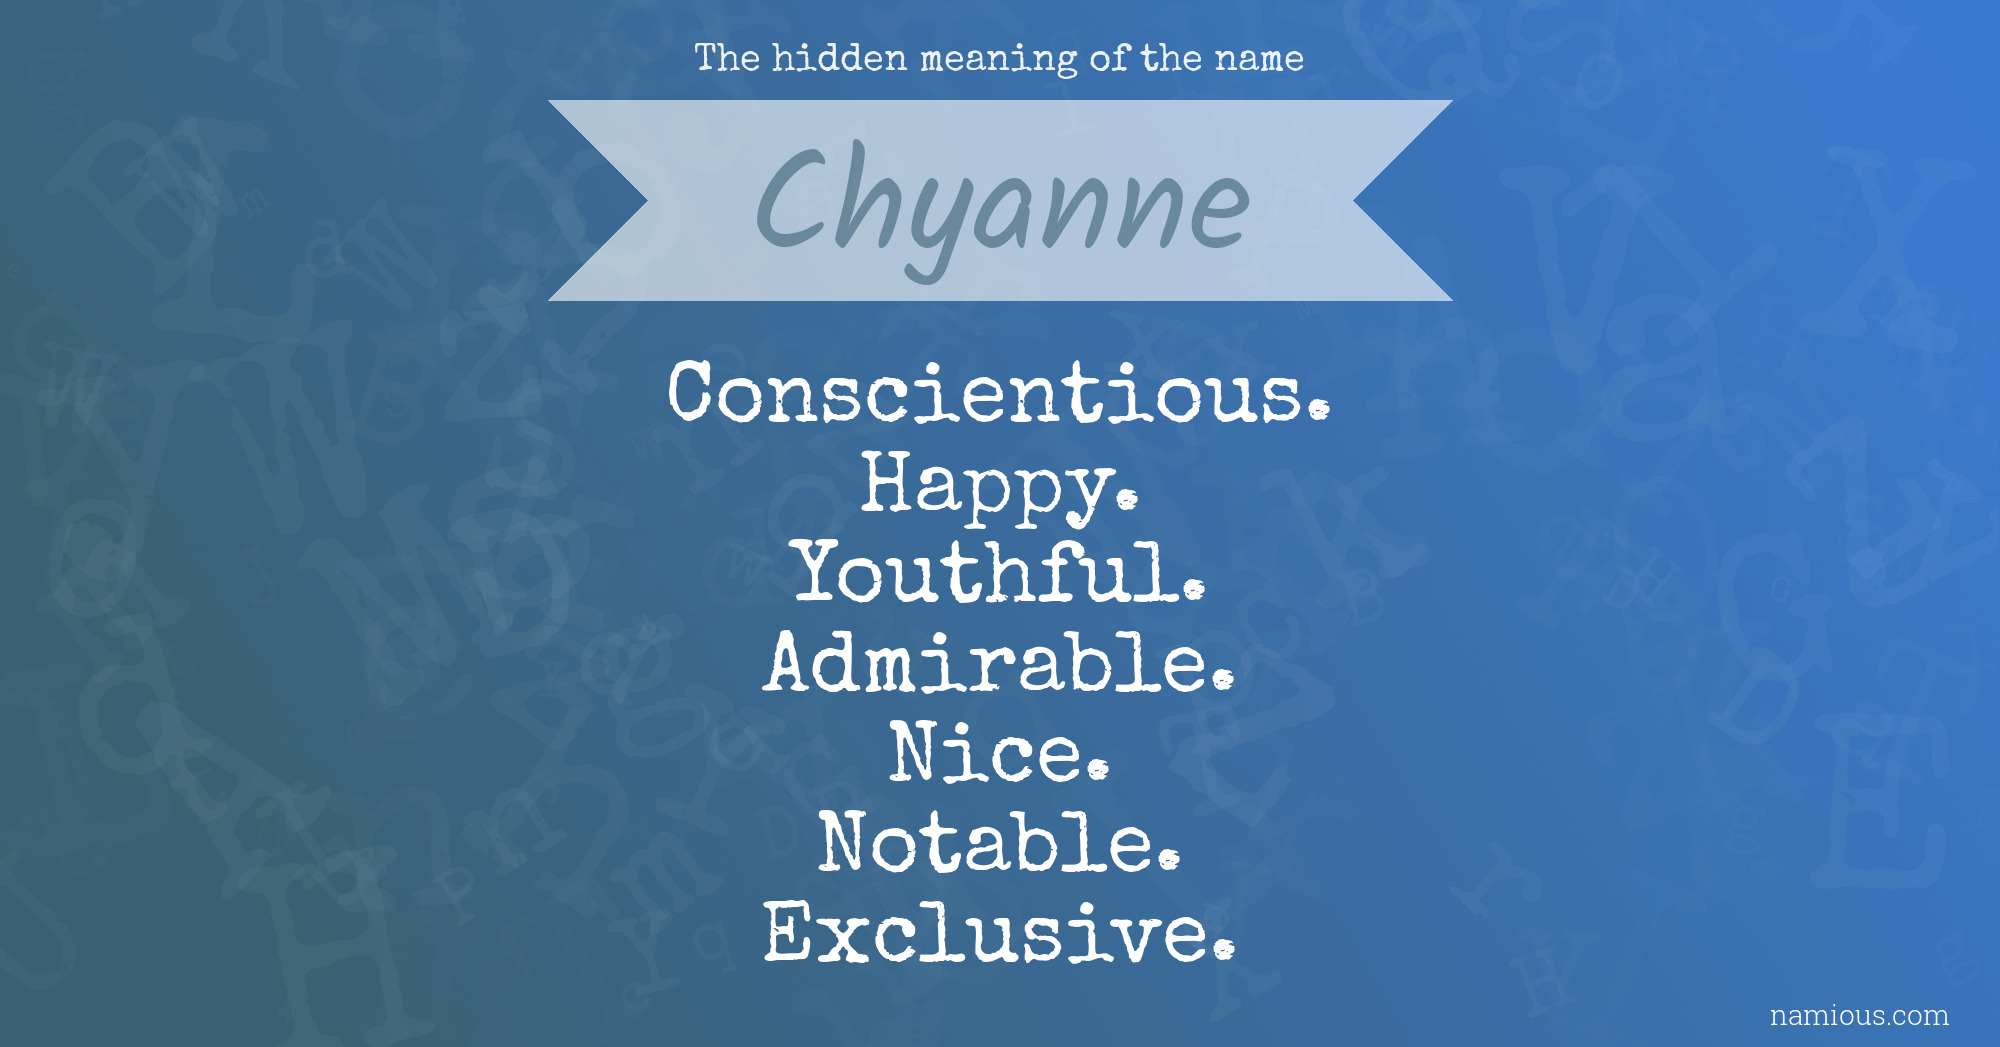 The hidden meaning of the name Chyanne